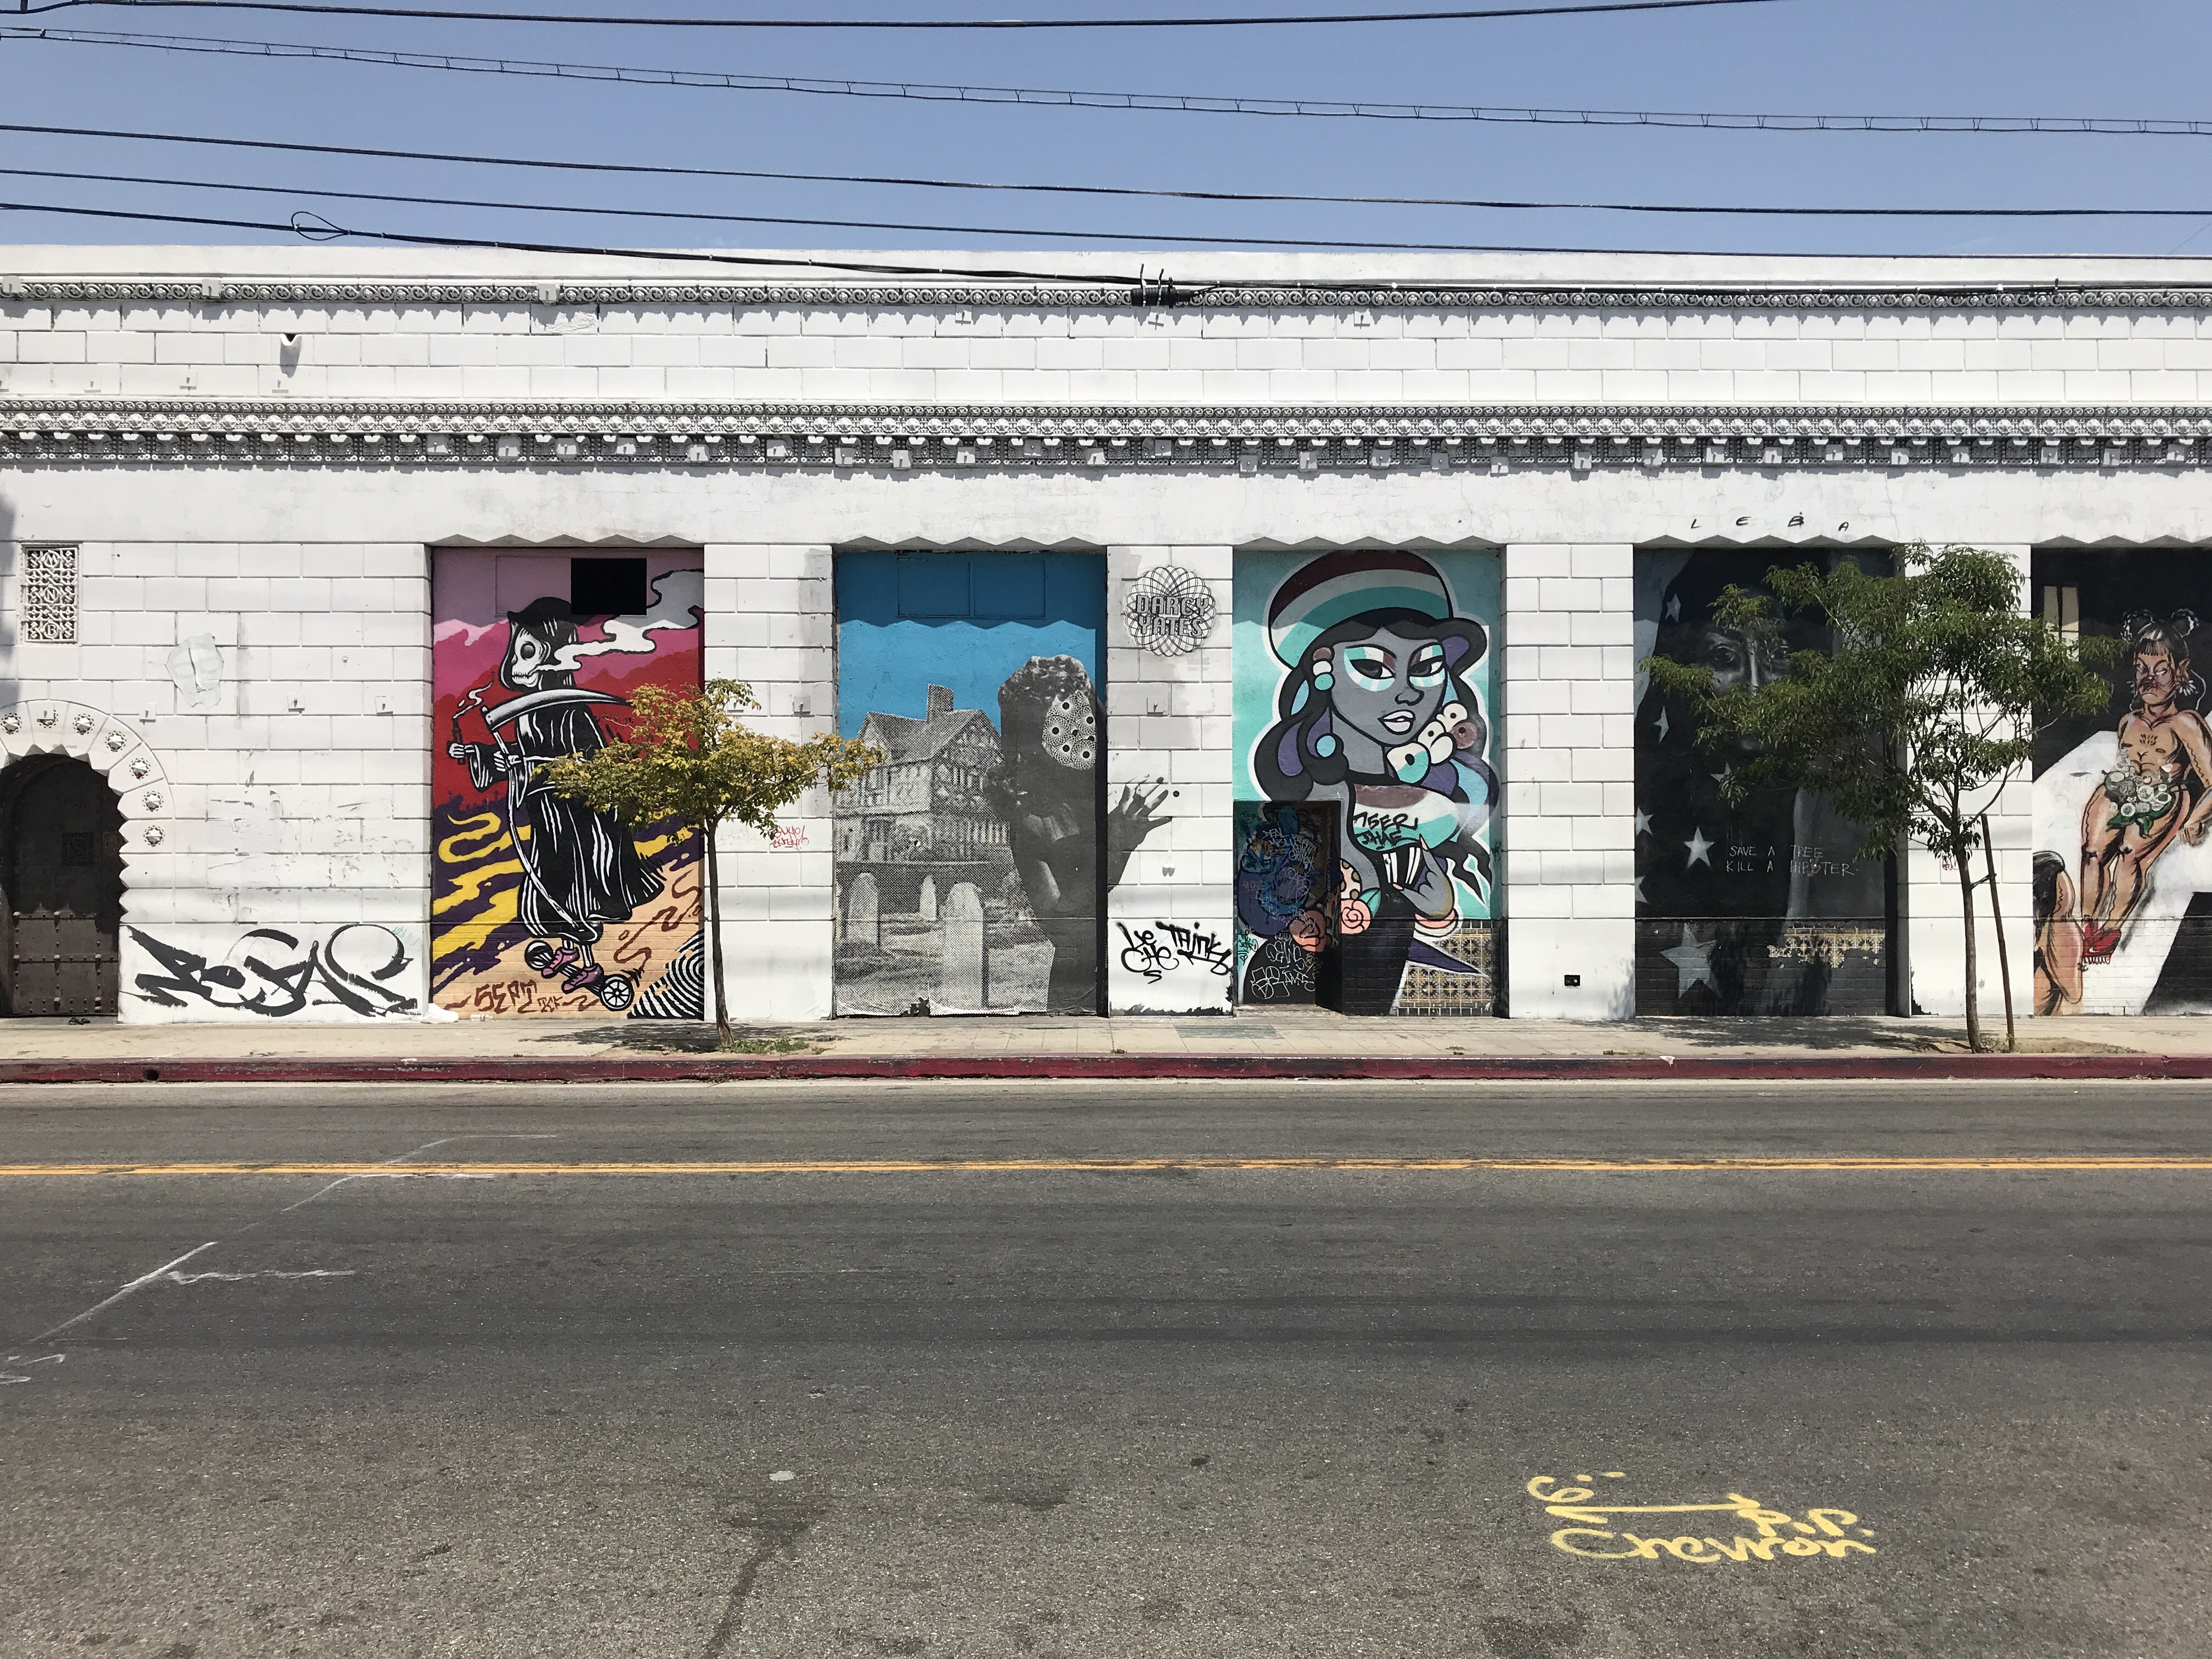 A Beginner's Guide To The Best Street Art (And Nearby Food) In L.A.